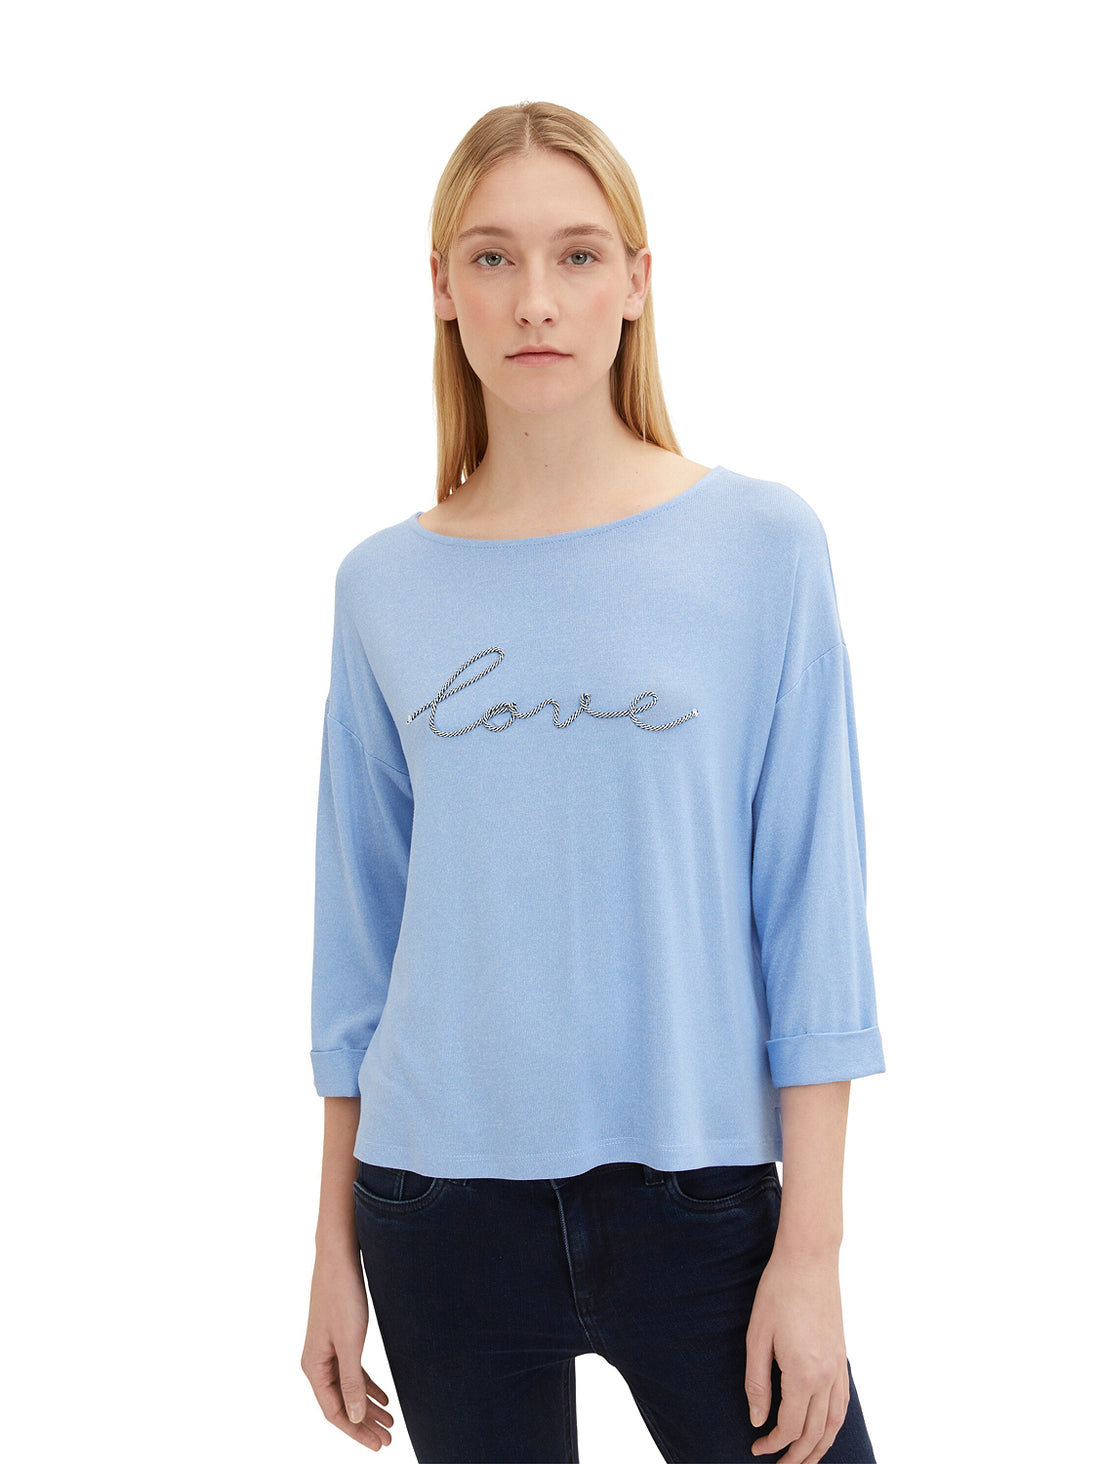 Pale Blue 3/4 Sleeve Graphic T-Shirt